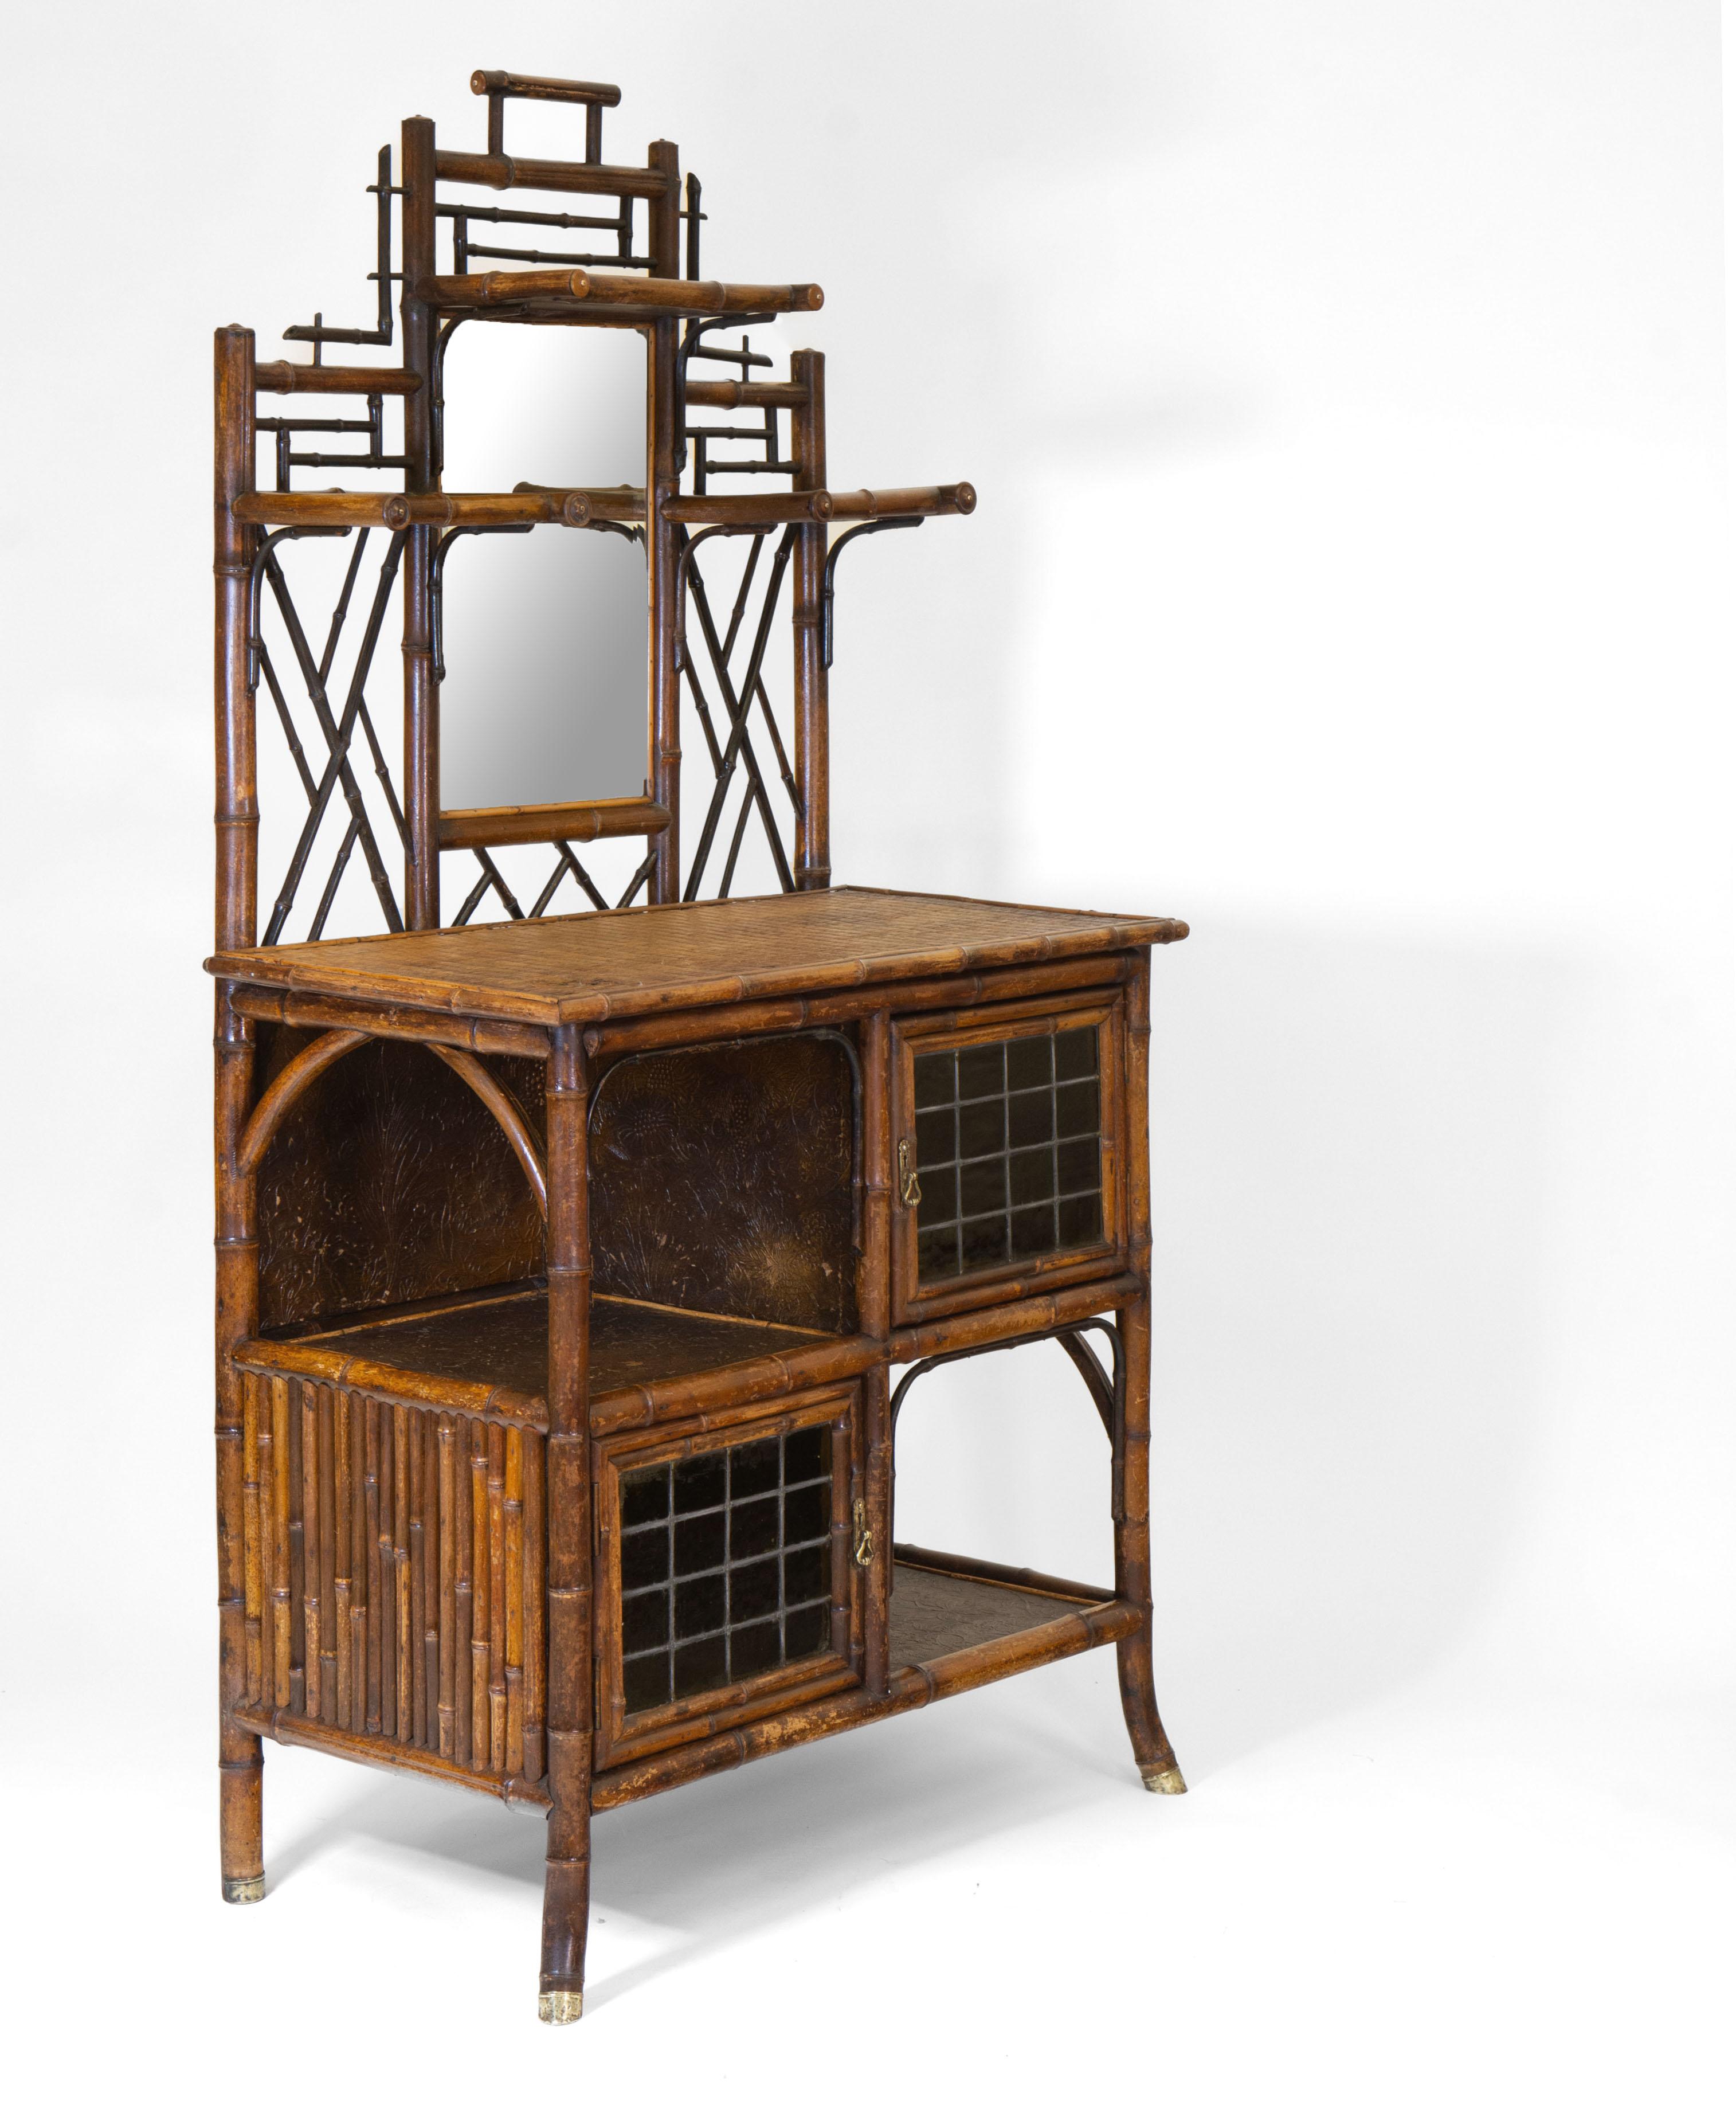 A wonderful late 19th century bamboo etagere/cabinet. Made by English firm W.F Needham. (1888-1901). Circa 1890.

The cabinet has 2 diagonally-set leaded, stained green glass doors, and two open compartments lined with embossed decorative paper.